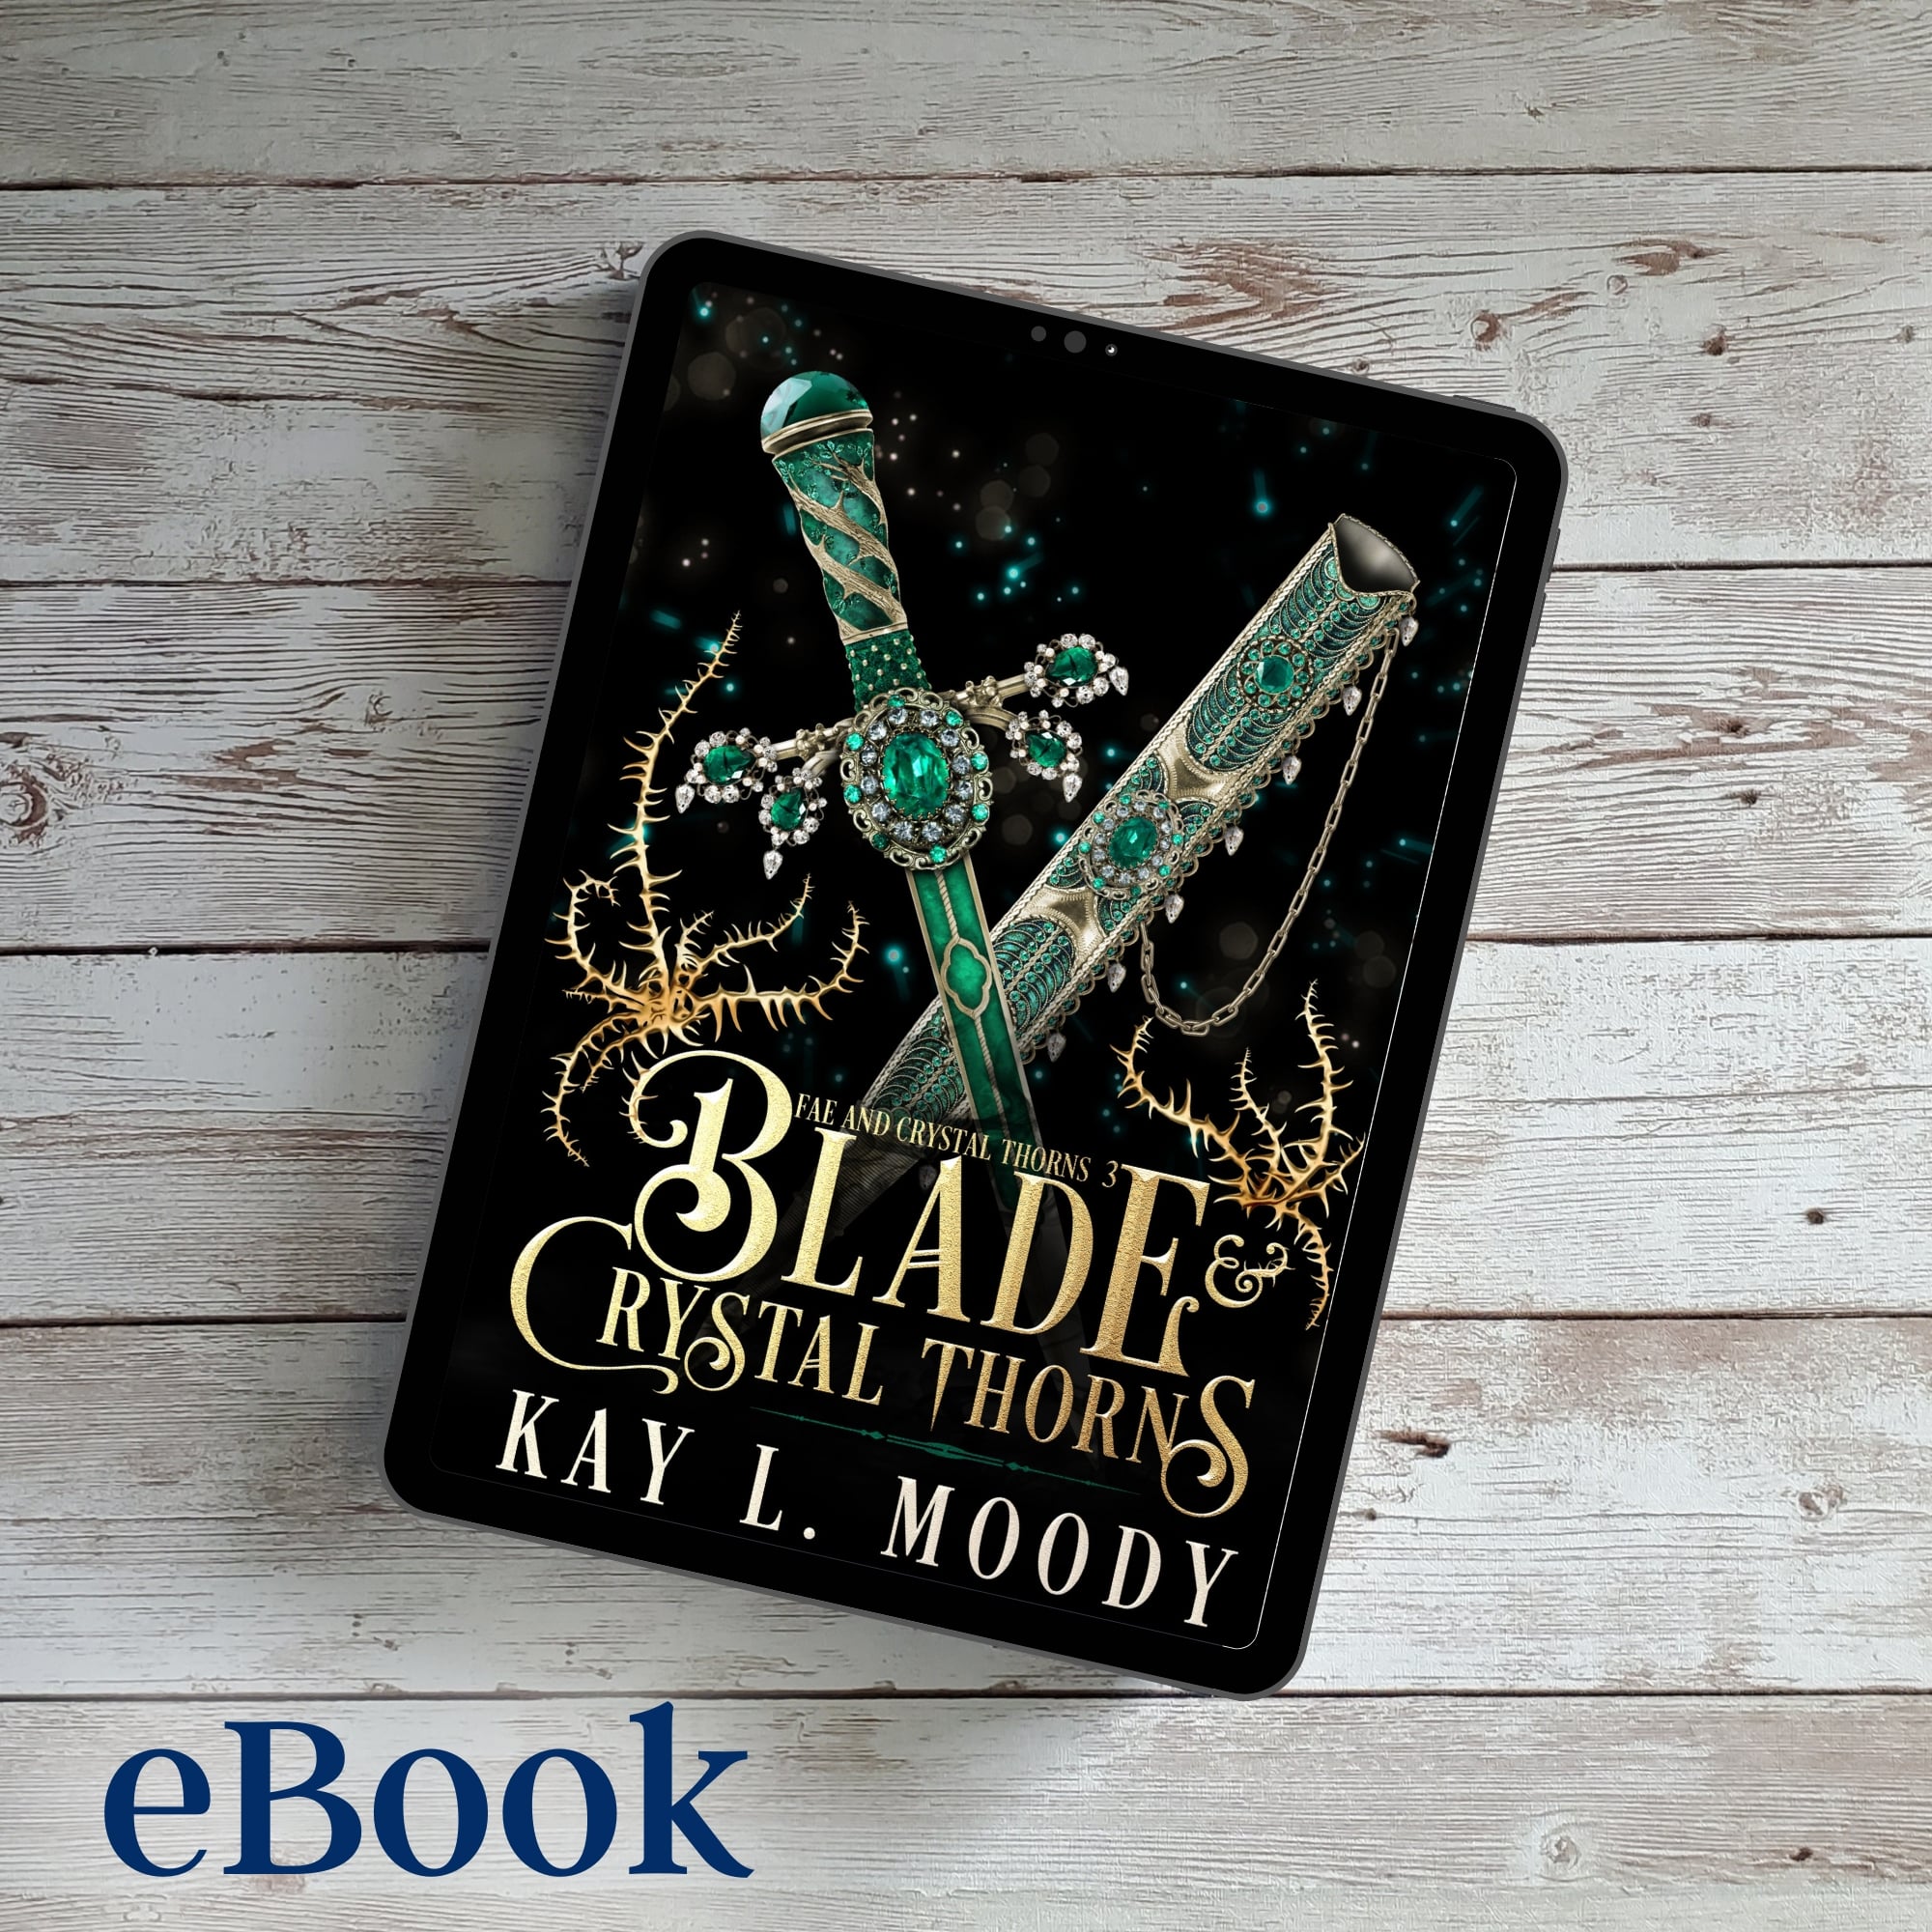 Blade and Crystal Thorns (eBook)